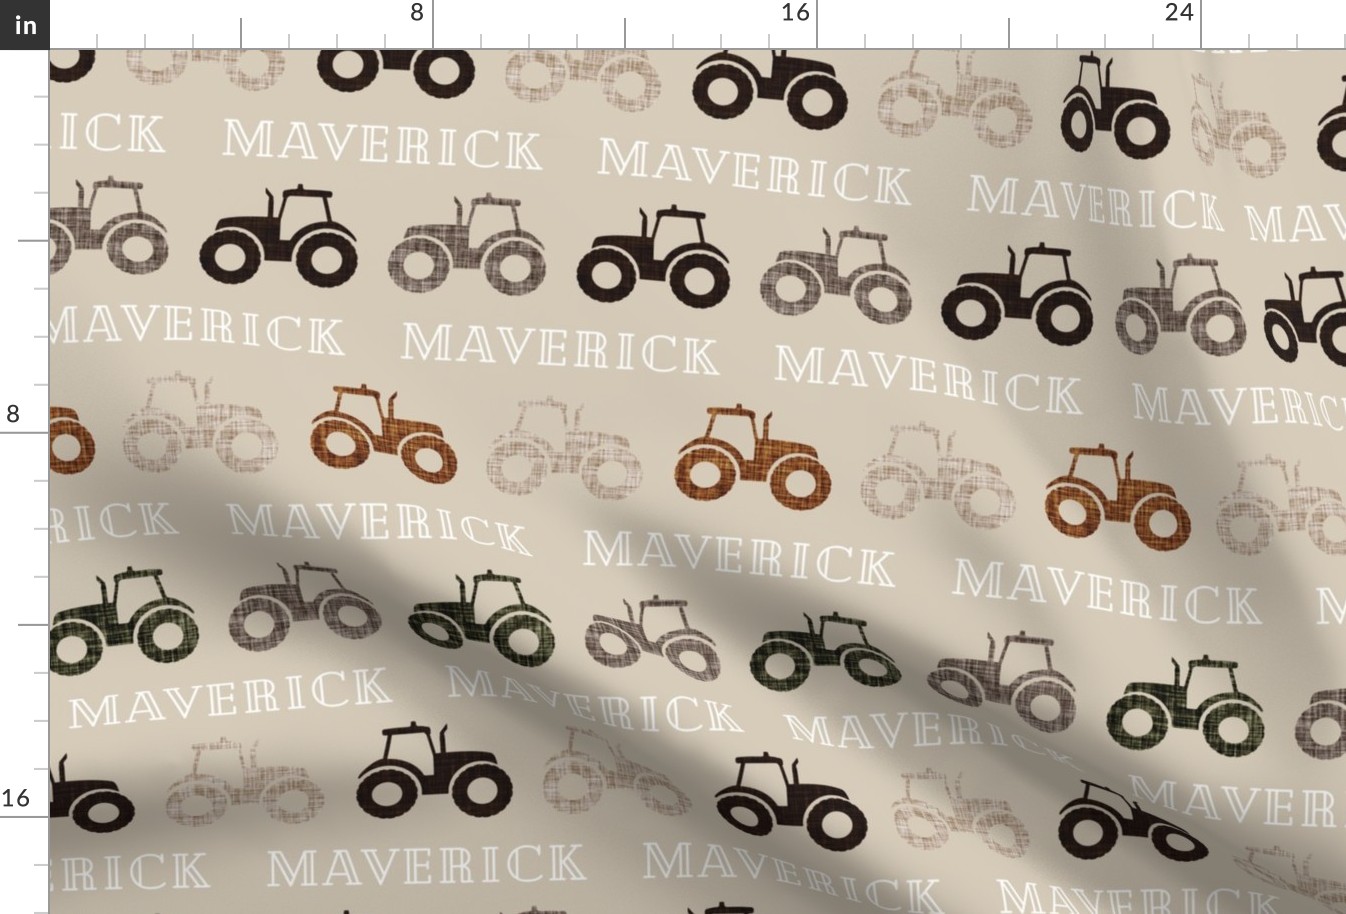 Maverick: Cheque Font on Tractors: linen, sugar sand, mud, brown, green olive, umber